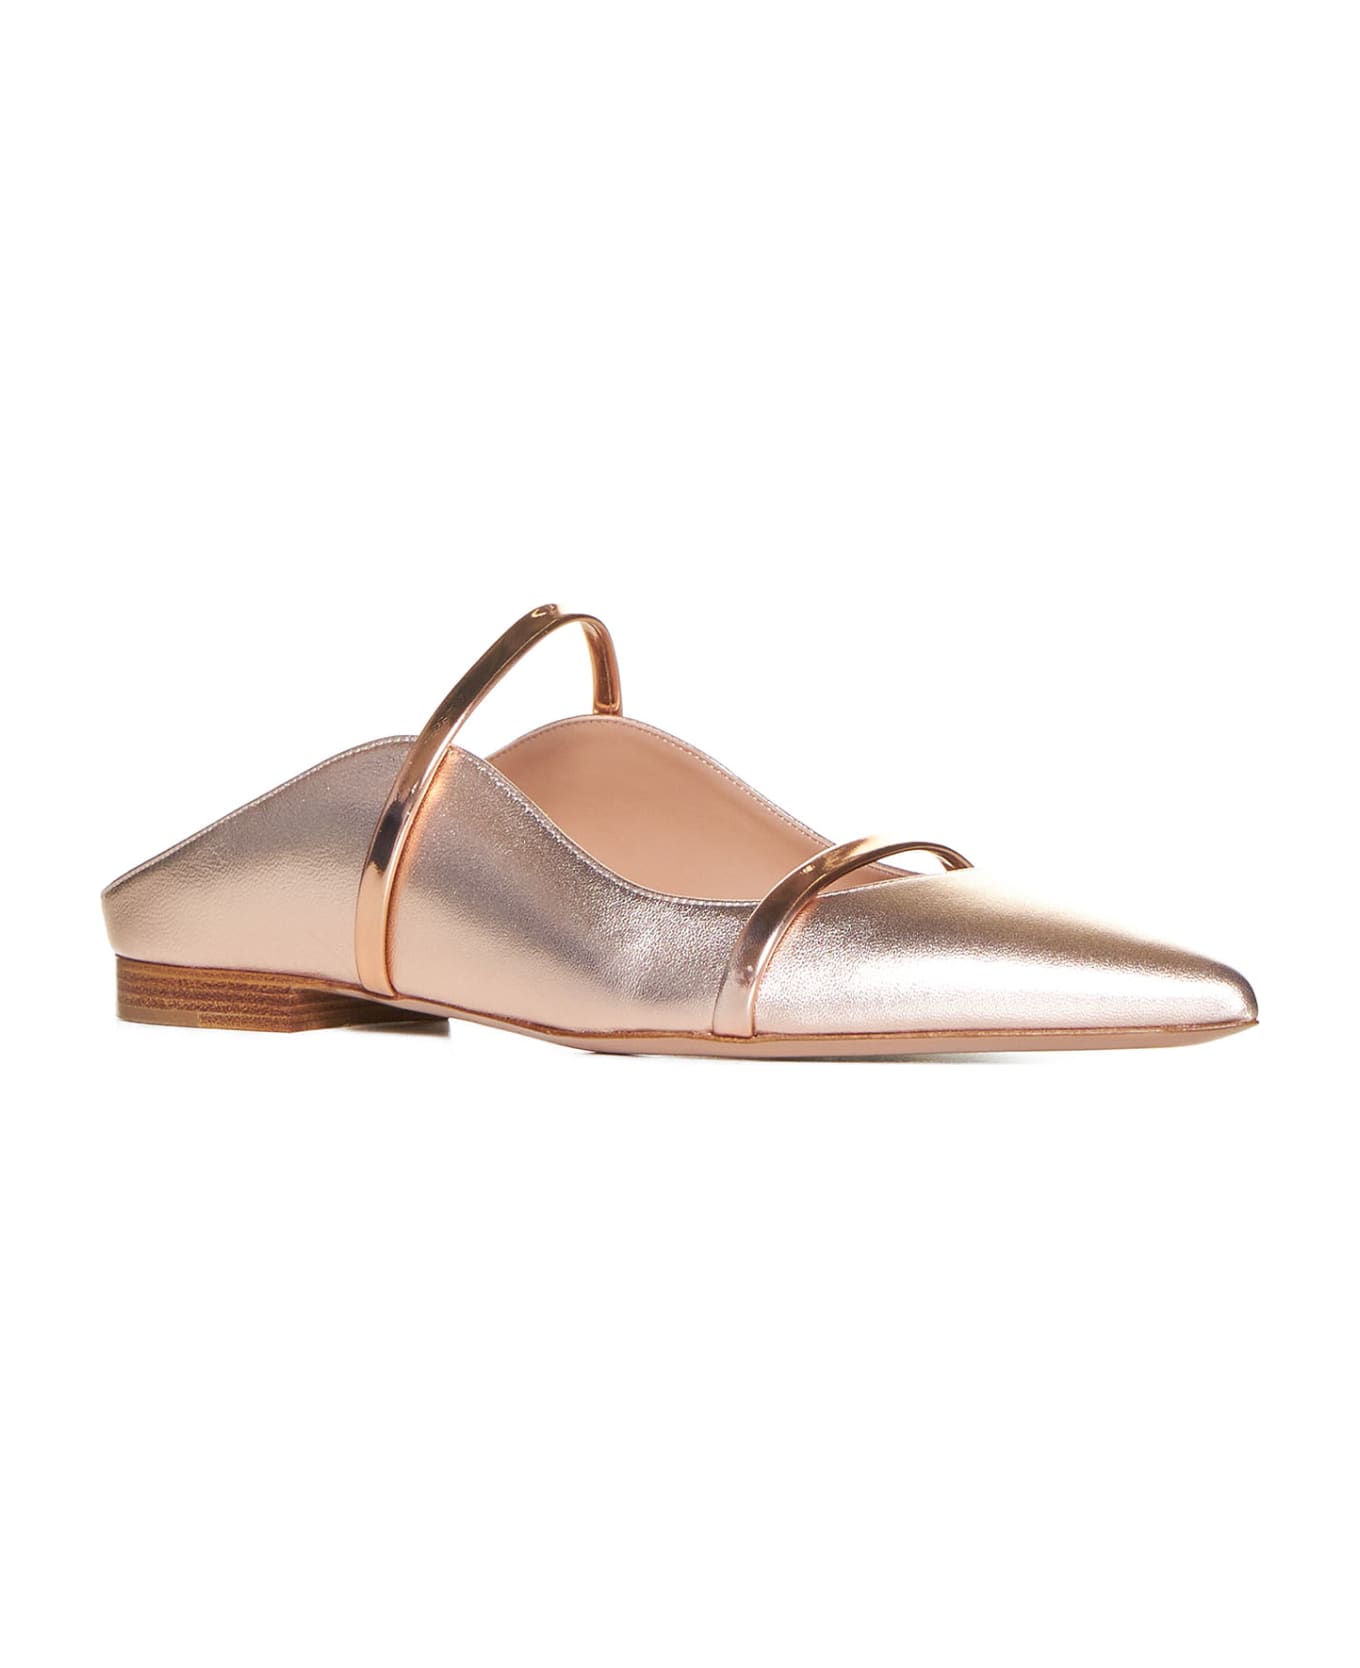 Malone Souliers Sandals - Rose gold フラットシューズ